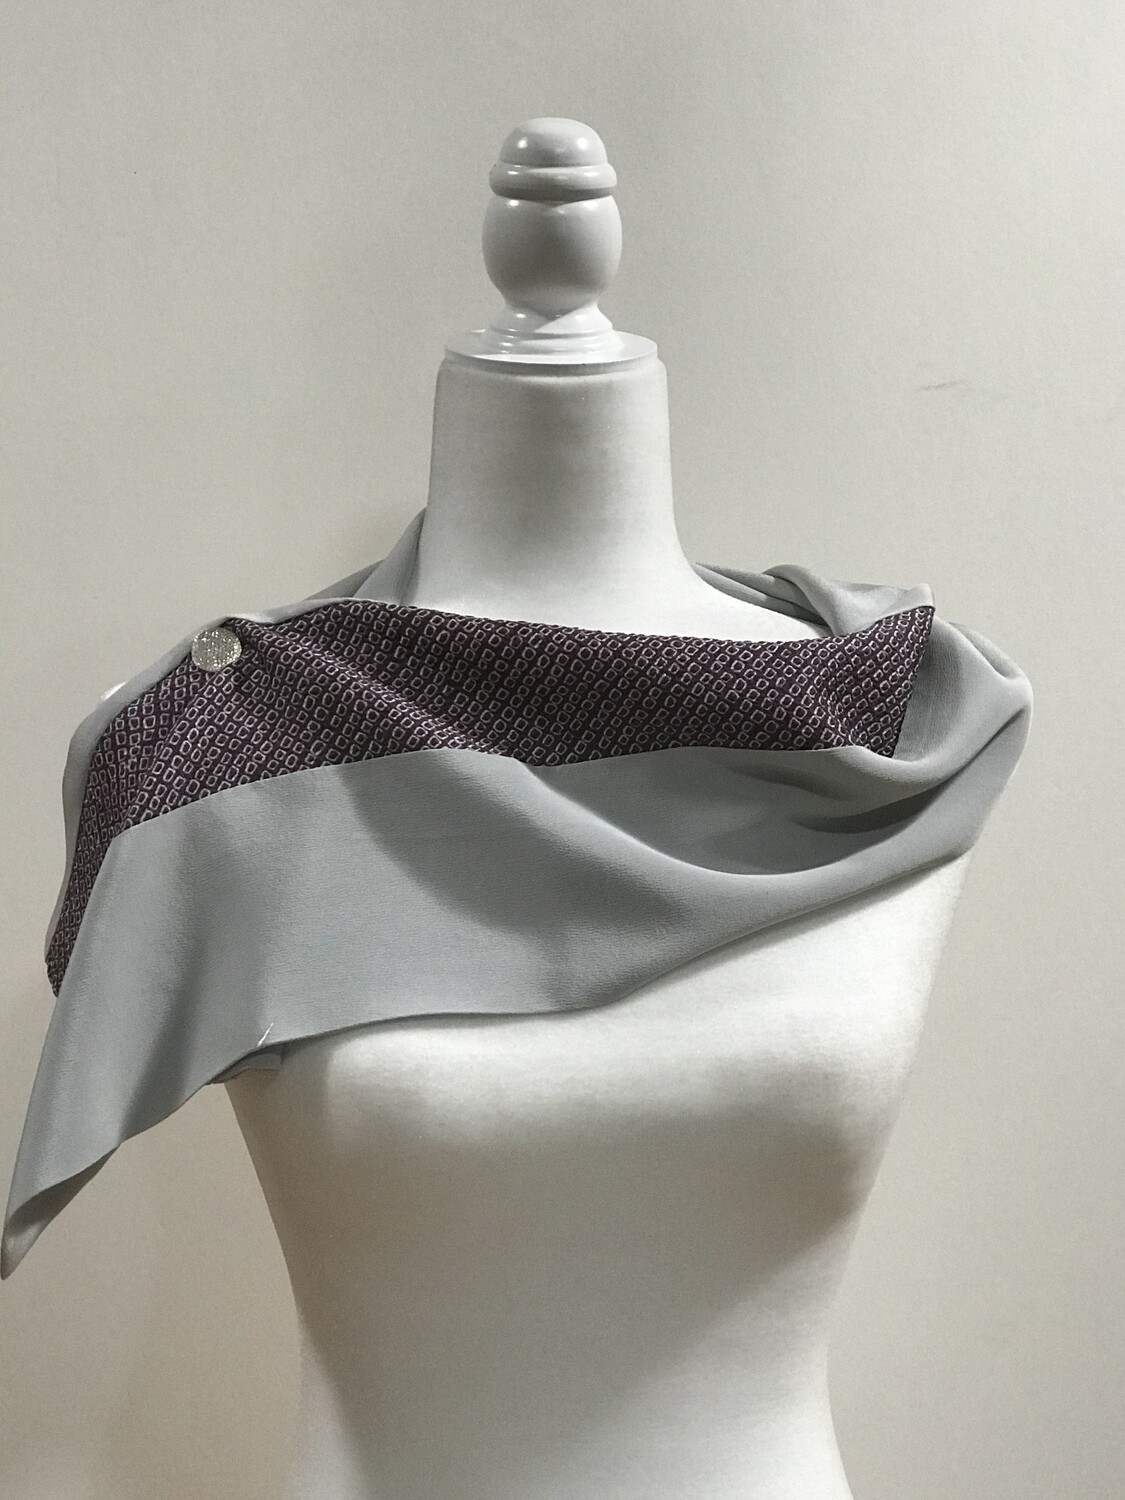 Scarf
8 x 43in